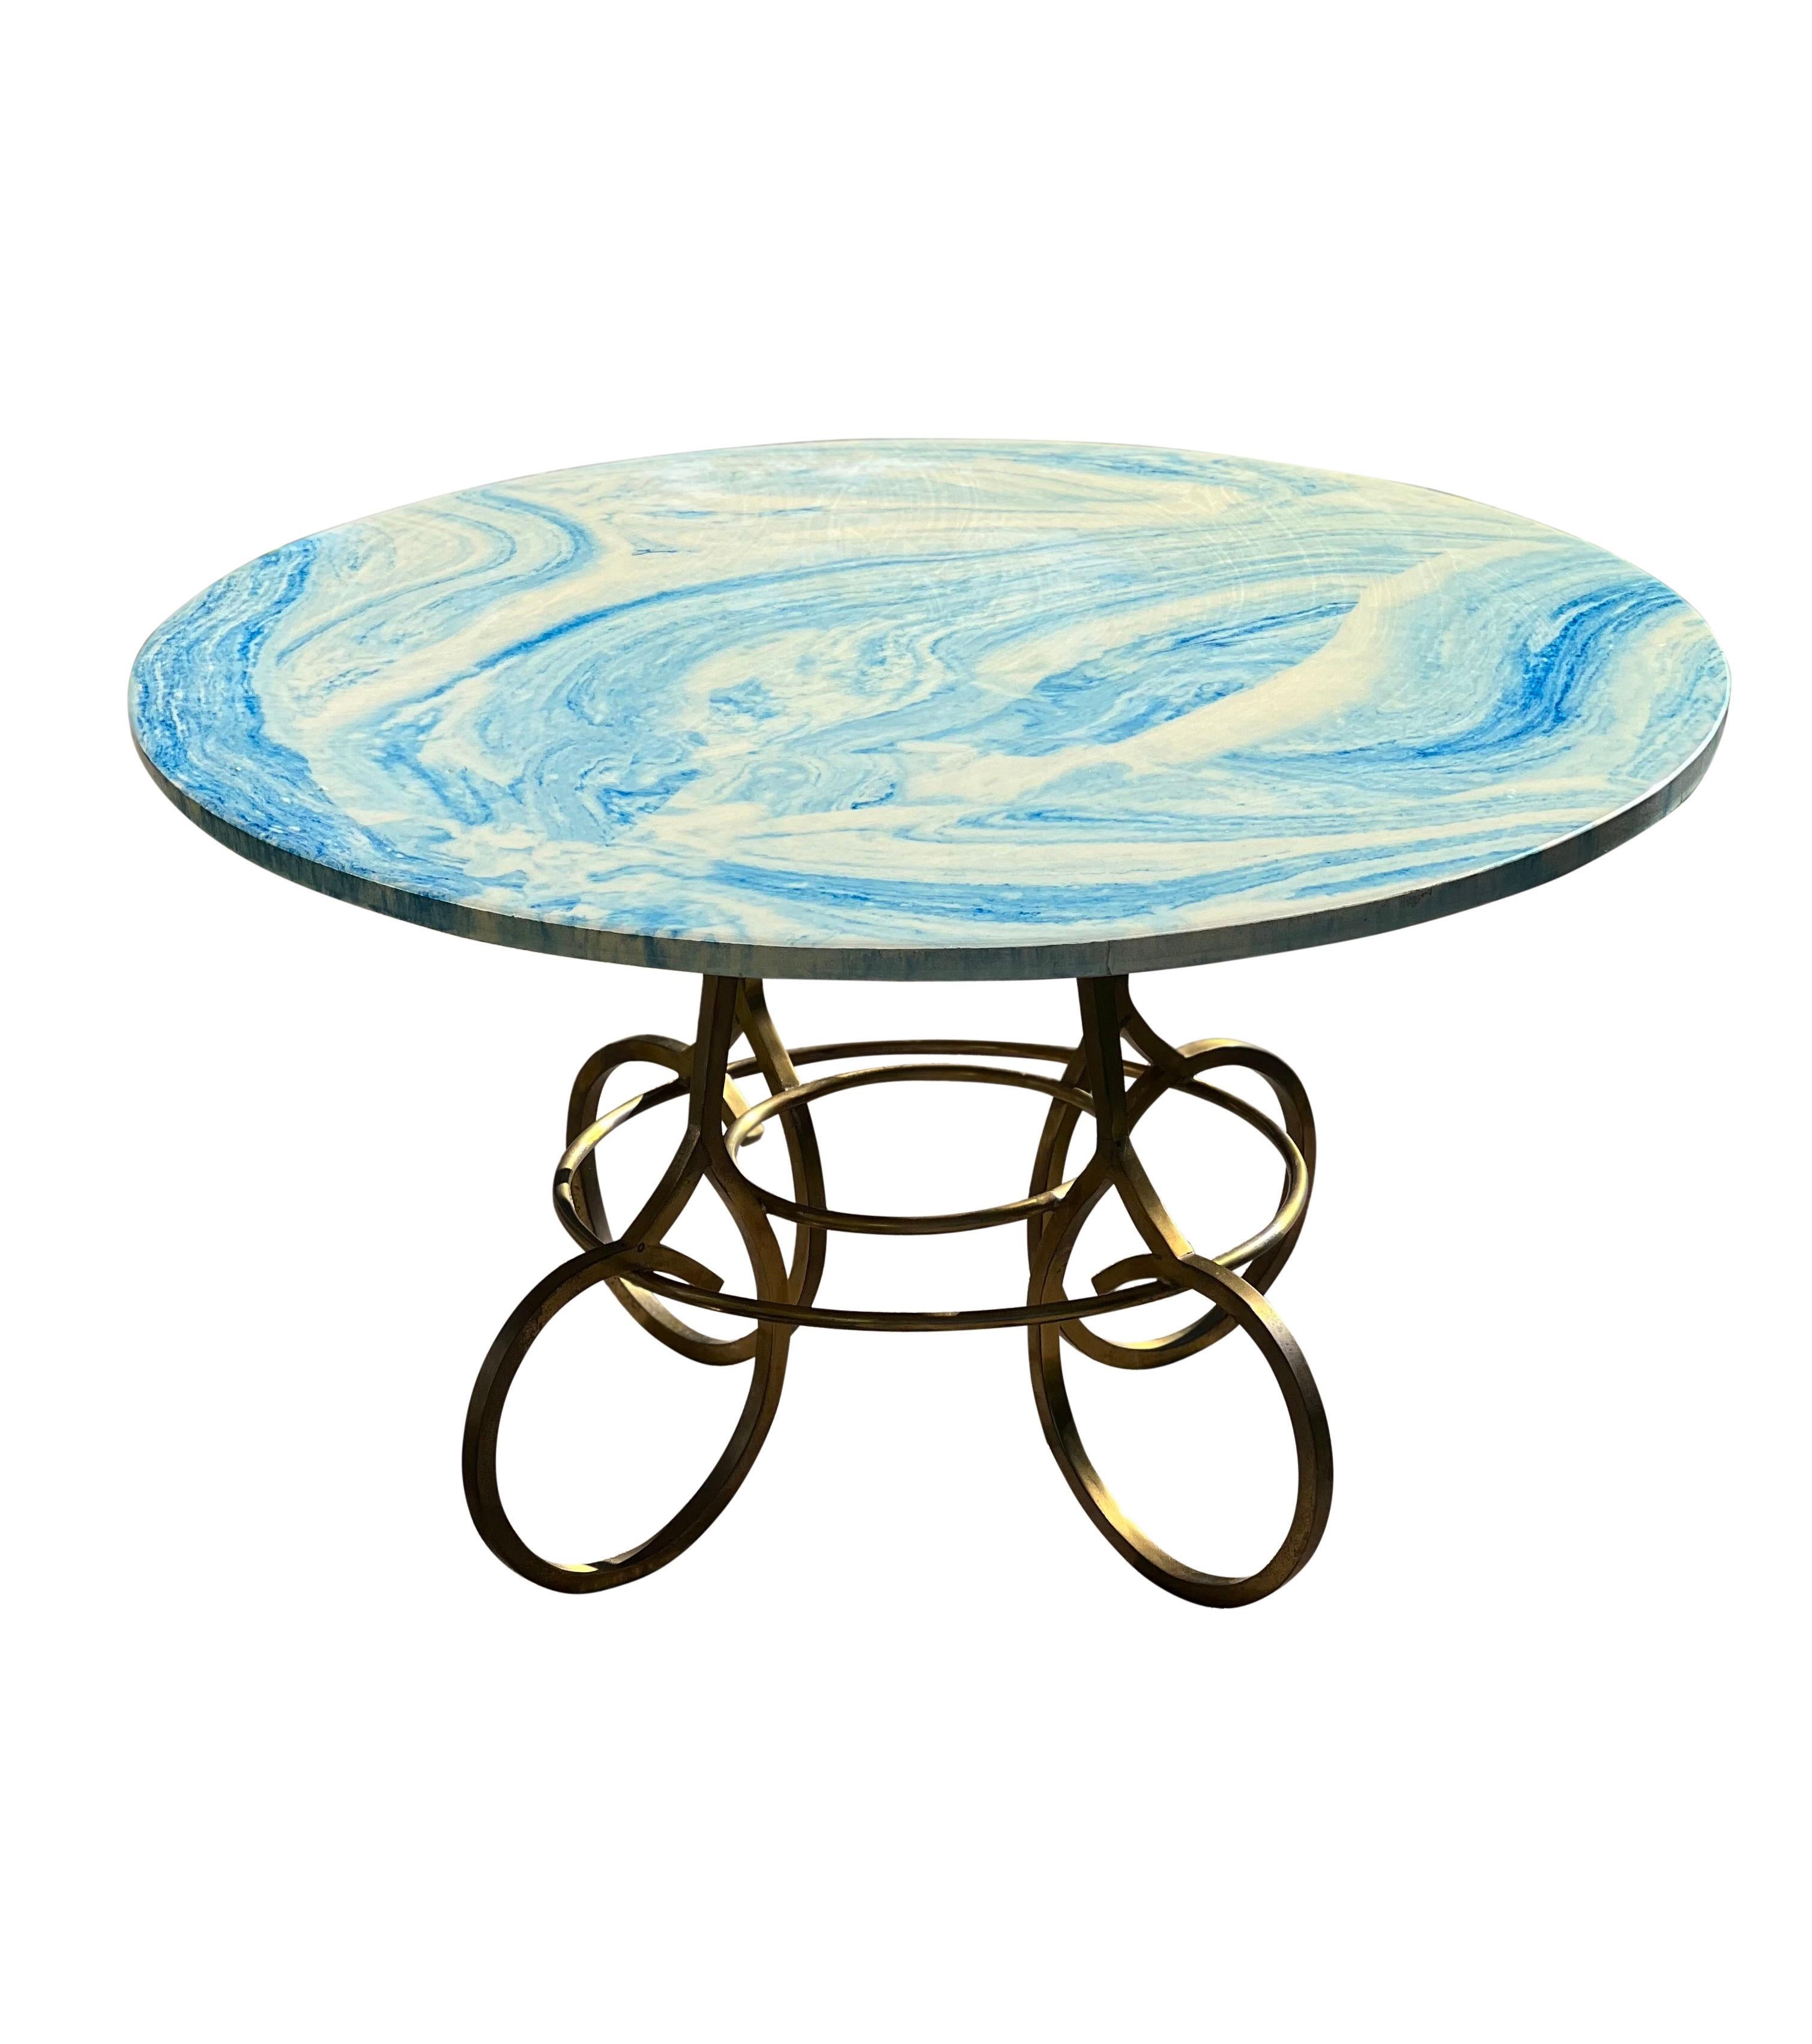 Vintage French Garden Brass and Marbleized Resin Coffee Table For Sale 3